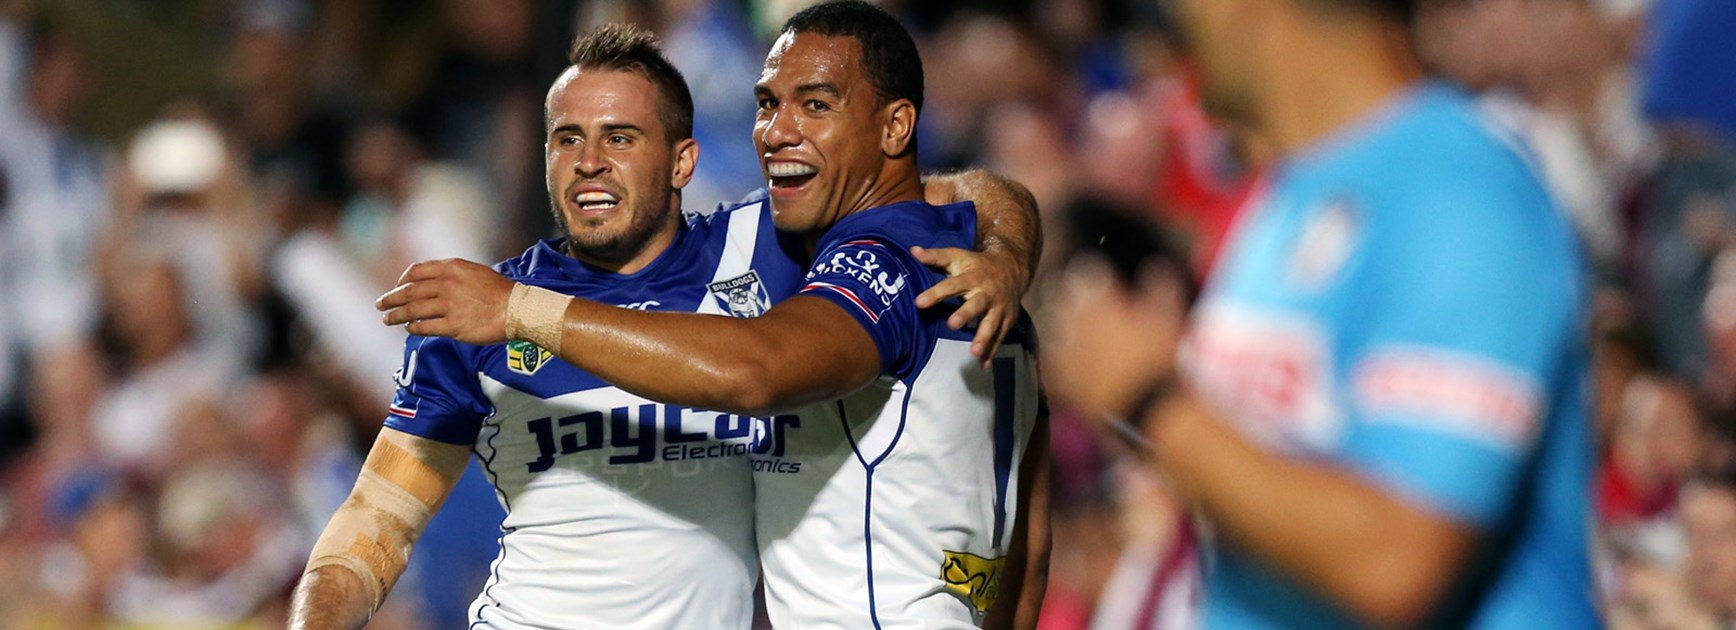 Josh Reynolds and Will Hopoate celebrate against Manly in Round 1.